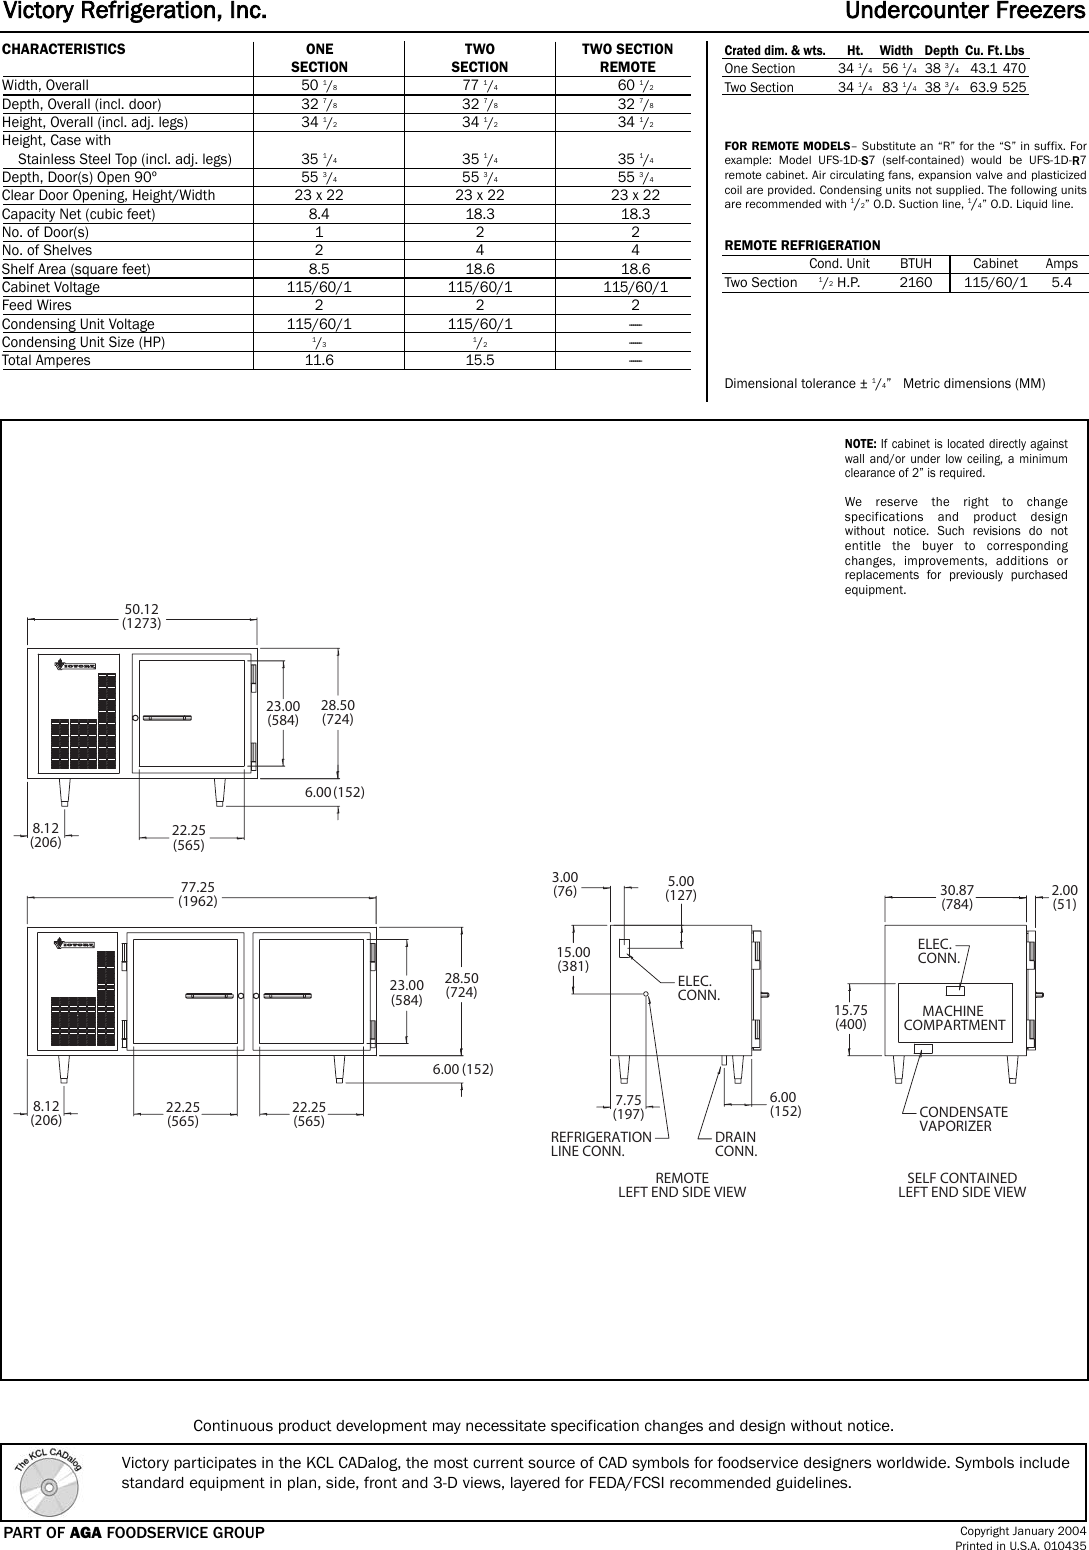 Page 2 of 2 - Victory-Refrigeration Victory-Refrigeration-Ufs-1-S7-Users-Manual- UFS-1-2-S7  Victory-refrigeration-ufs-1-s7-users-manual